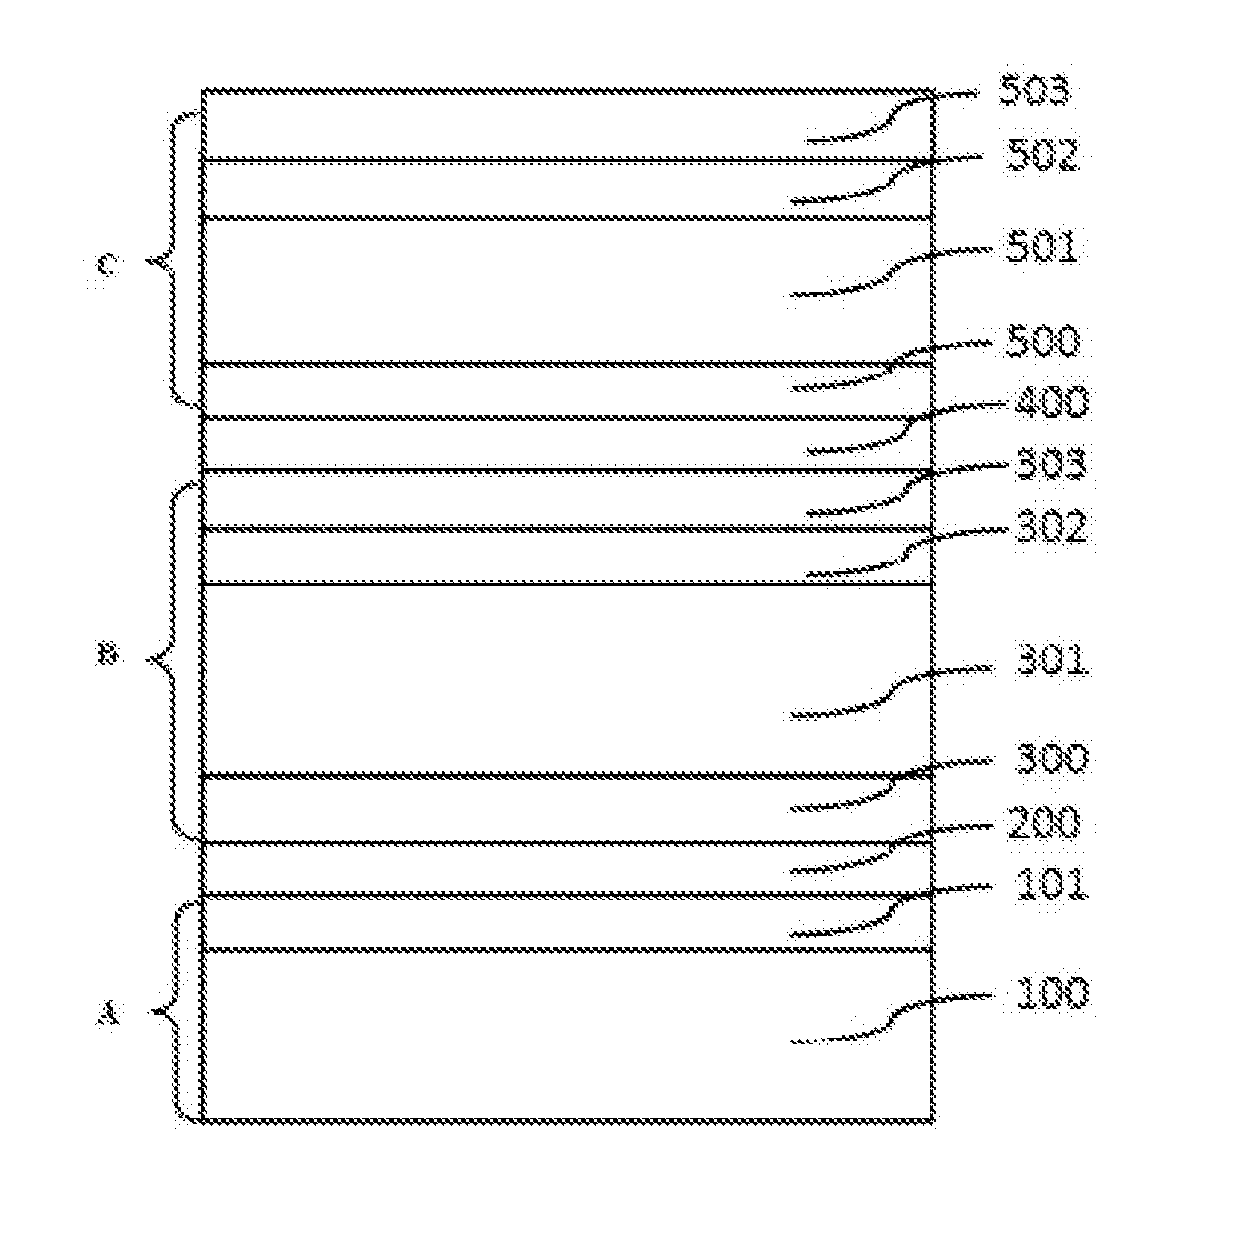 High-concentration multi-junction solar cell and method for fabricating same